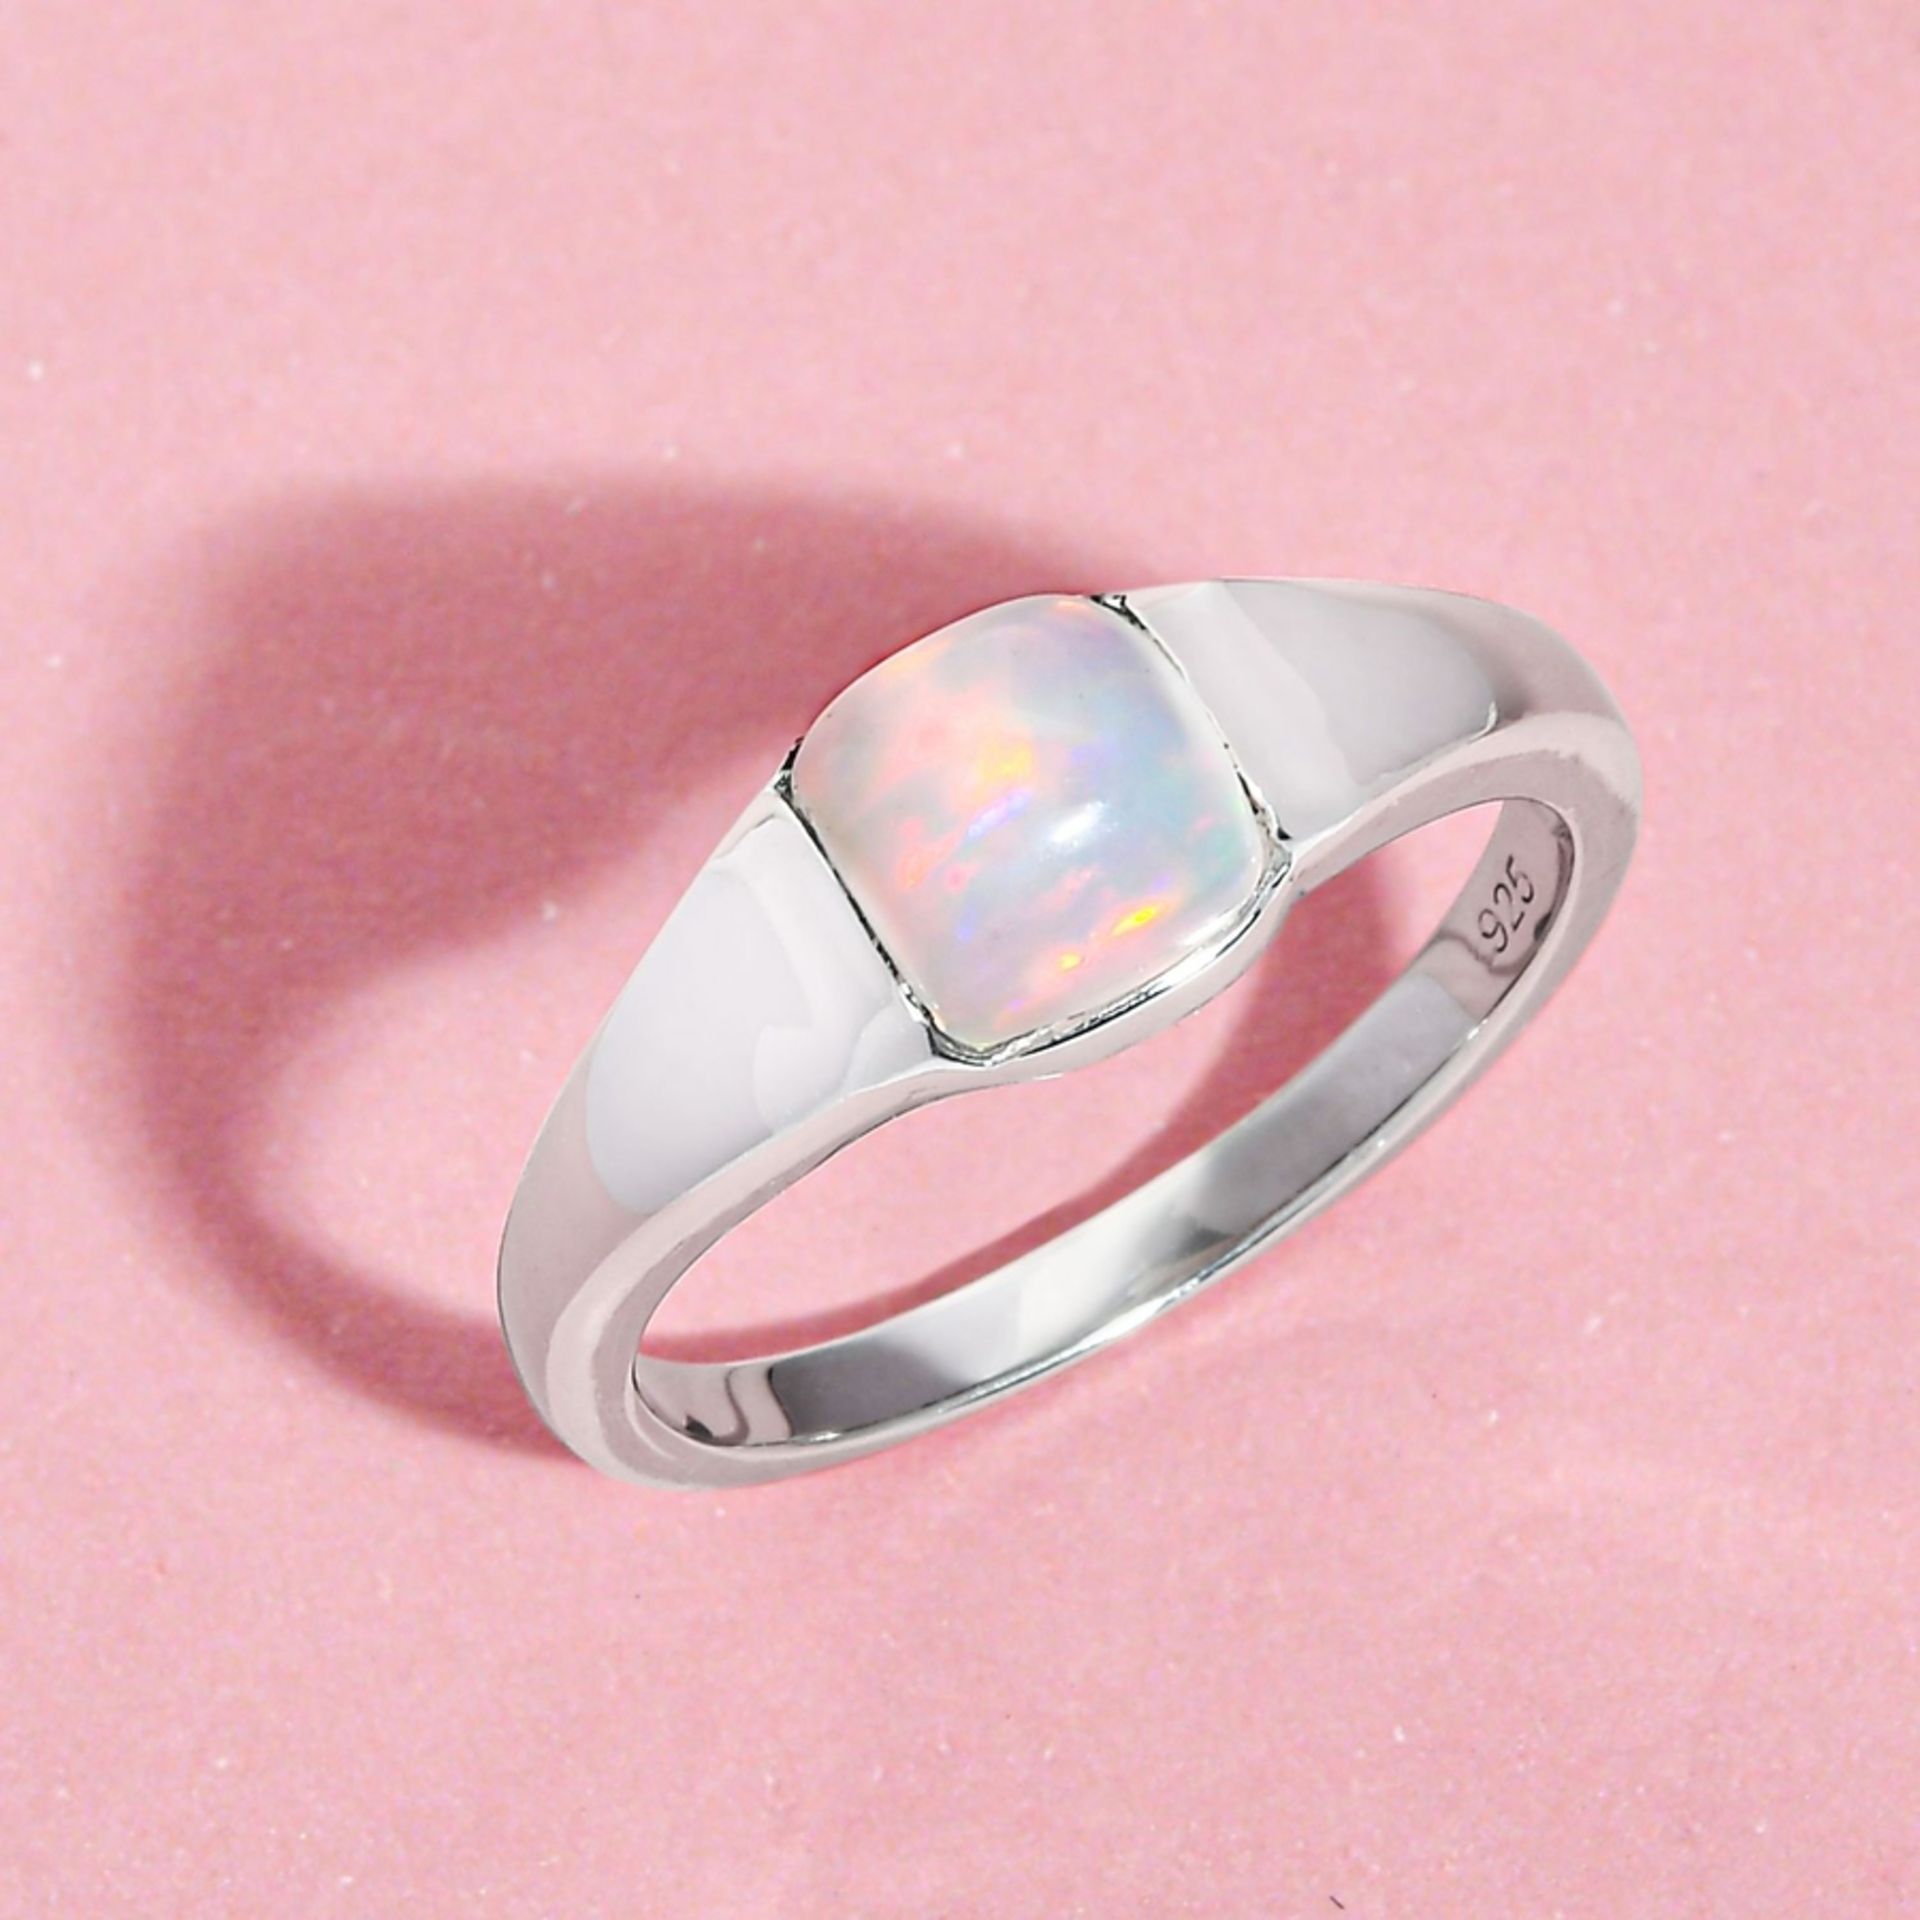 NEW!! Ethiopian Welo Opal Solitaire Ring in Platinum Overlay Sterling Silver